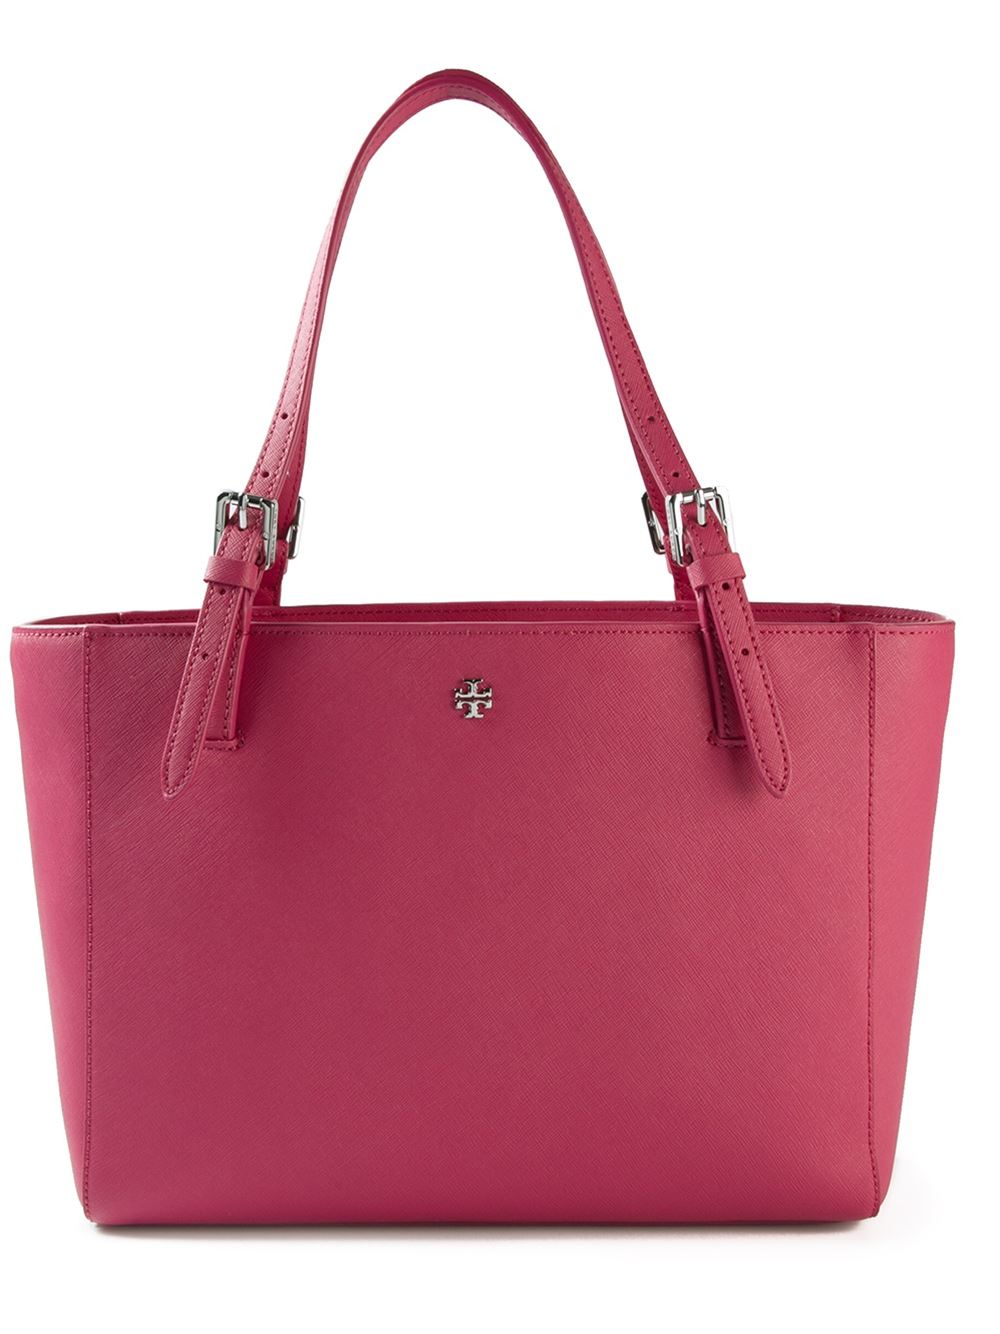 Tory burch Large 'York' Shopper Tote in Pink | Lyst